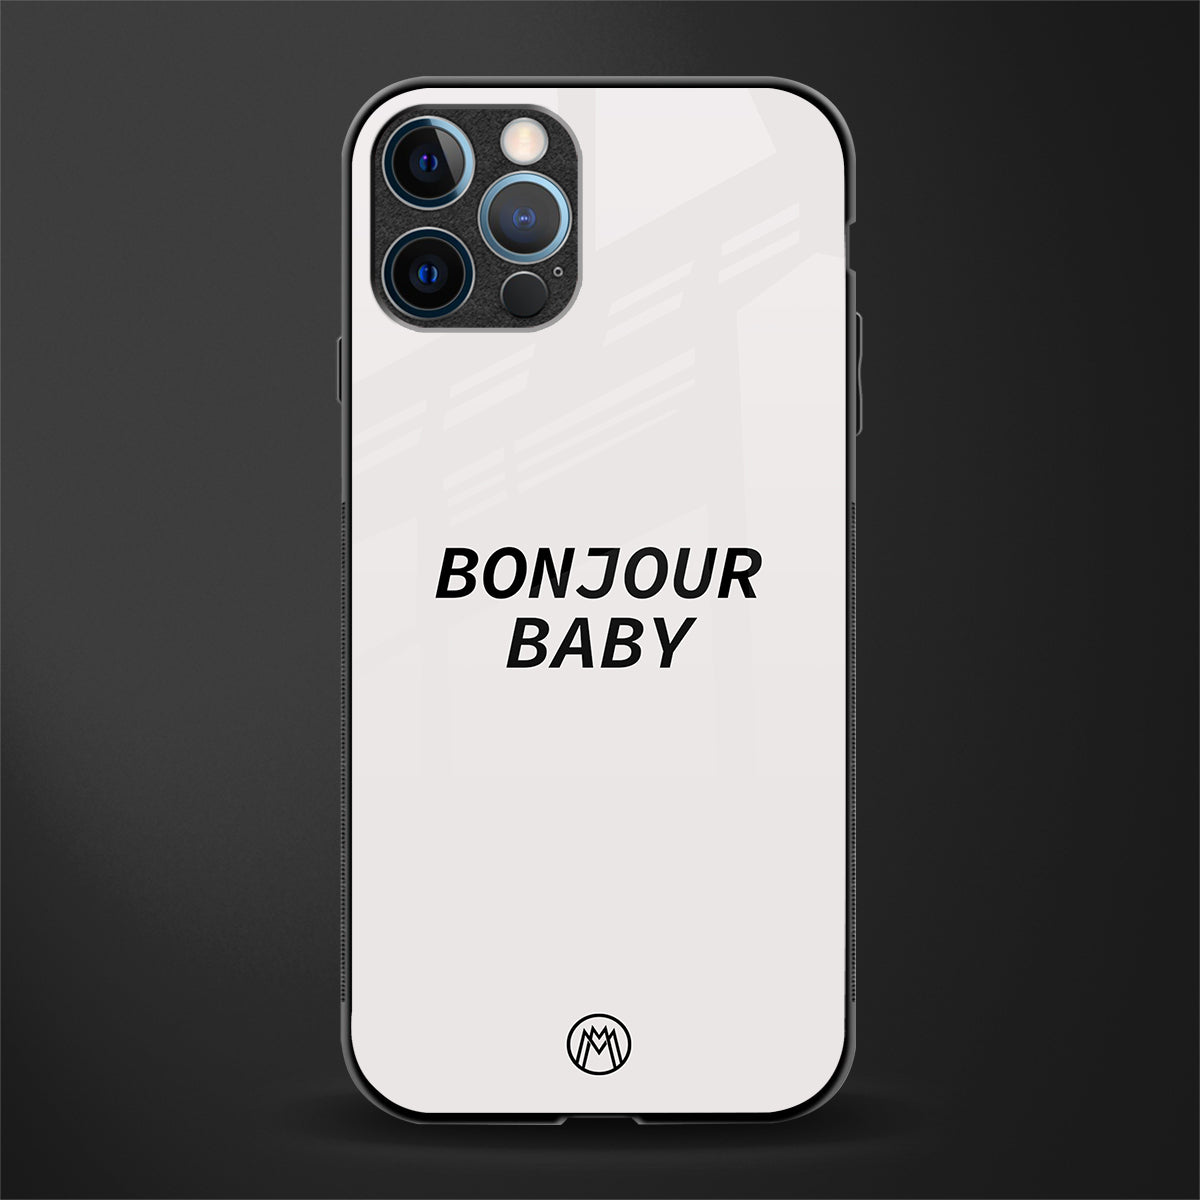 bonjour baby glass case for iphone 12 pro max image